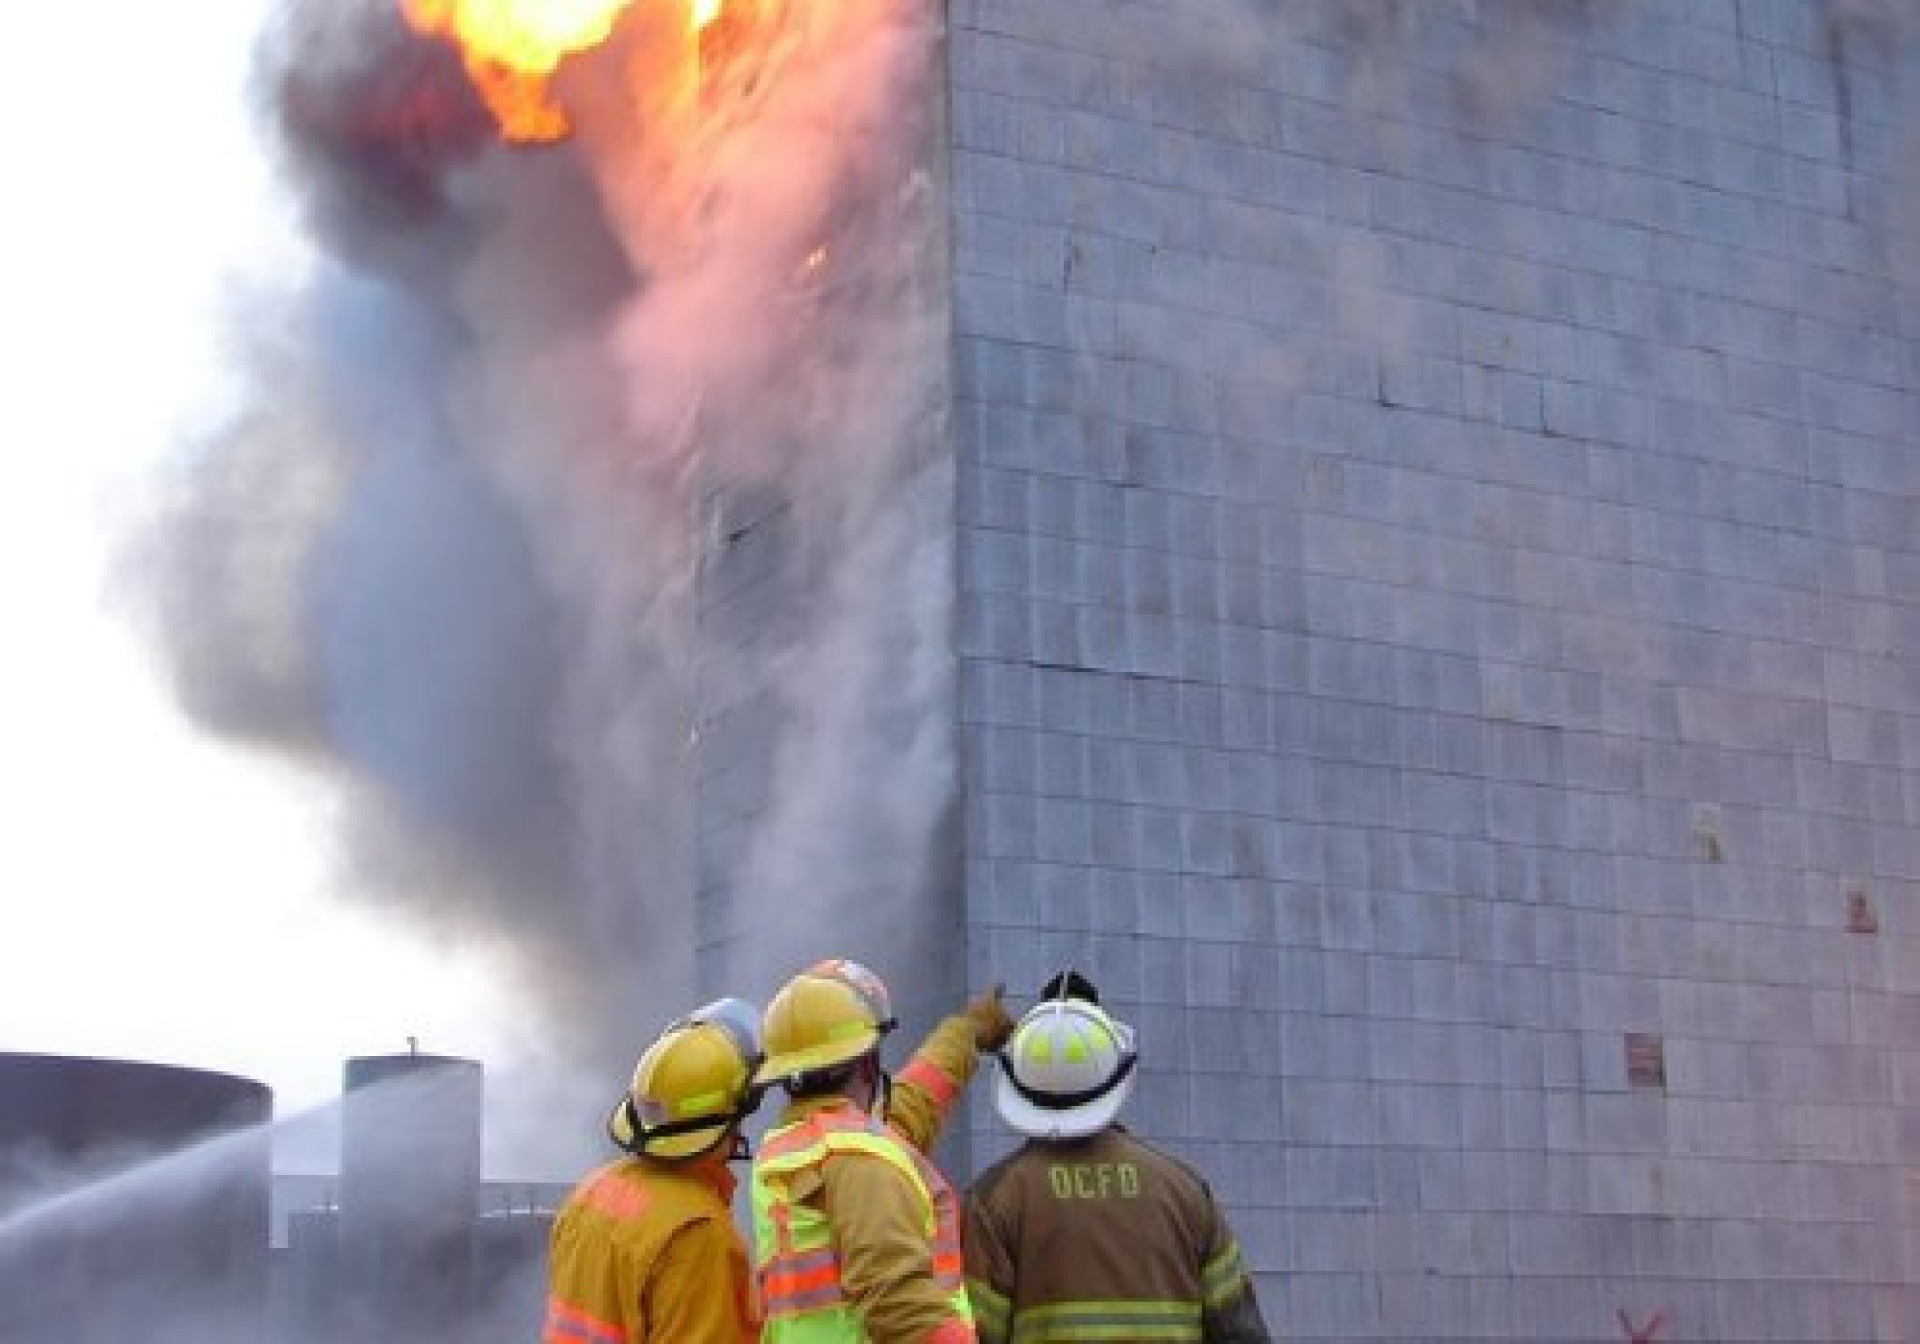 Image of firefighters pointing at a building on a fire after an emergency or natural disaster.